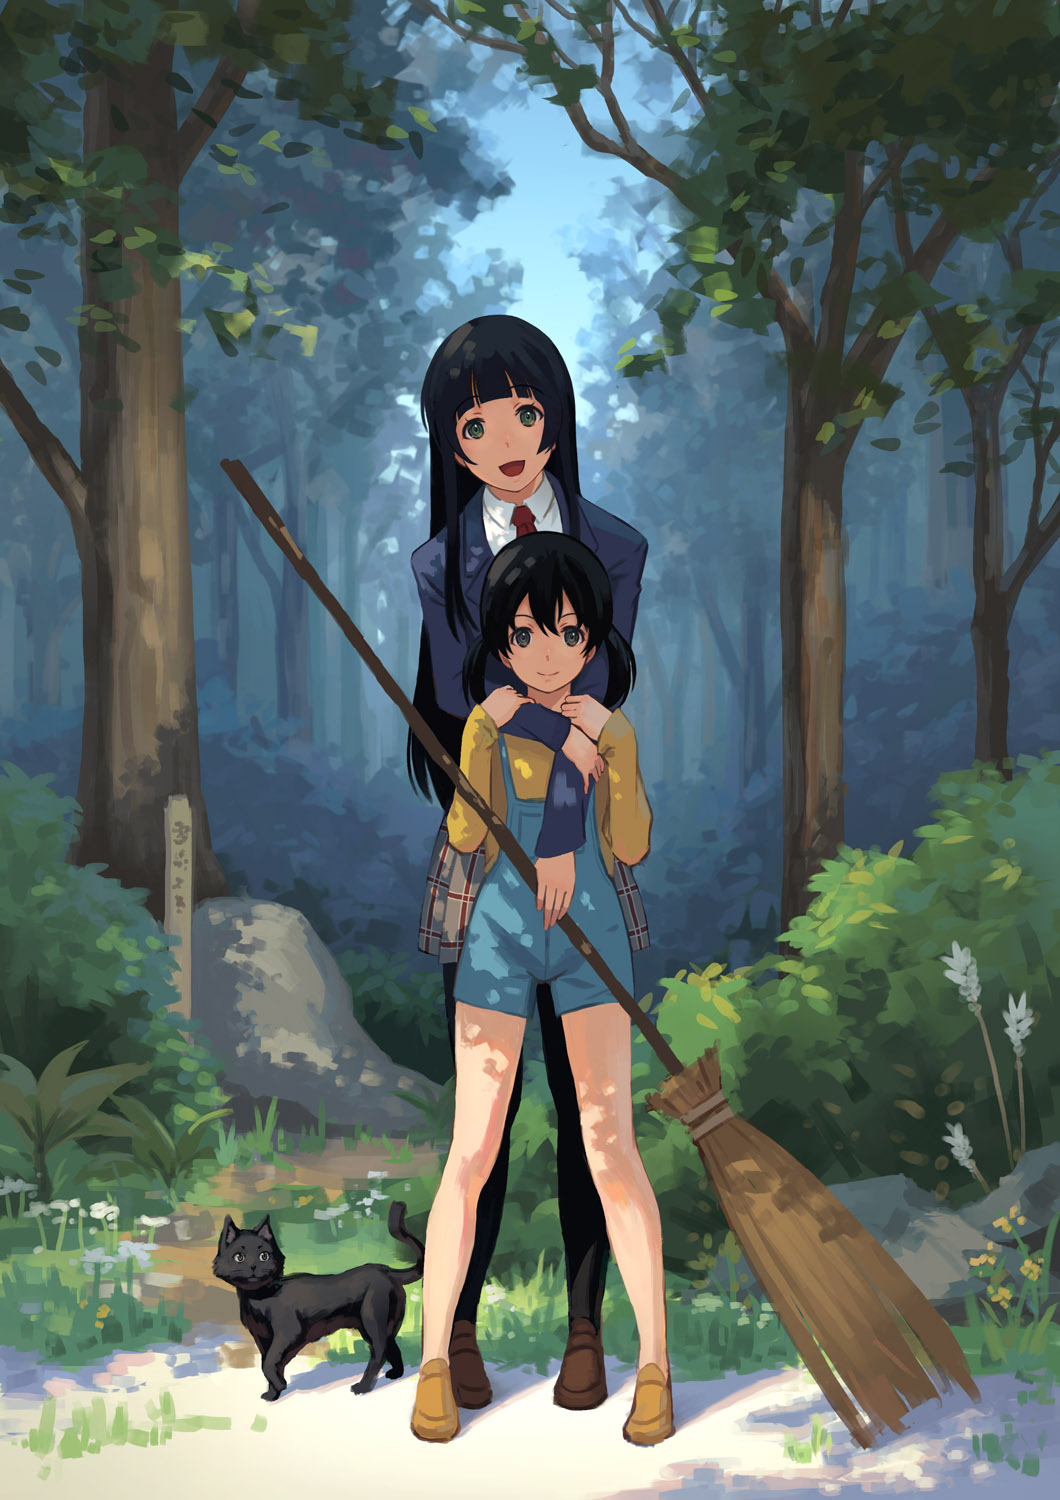 2girls :d animal arm_holding bangs bare_legs black_cat black_hair black_legwear blazer broom brown_shoes bush cat closed_mouth collared_shirt dappled_sunlight dress_shirt flying_witch grass green_eyes hand_on_another's_arm height_difference highres holding_broom hug hug_from_behind jacket kowata_makoto kuramoto_chinatsu legs_apart loafers long_hair long_sleeves looking_at_viewer miniskirt multiple_girls necktie open_mouth outdoors overalls pantyhose pinakes plaid plaid_skirt pleated_skirt red_necktie rock school_uniform shade shirt shoes skirt smile standing sunlight tree twintails white_shirt yellow_shoes